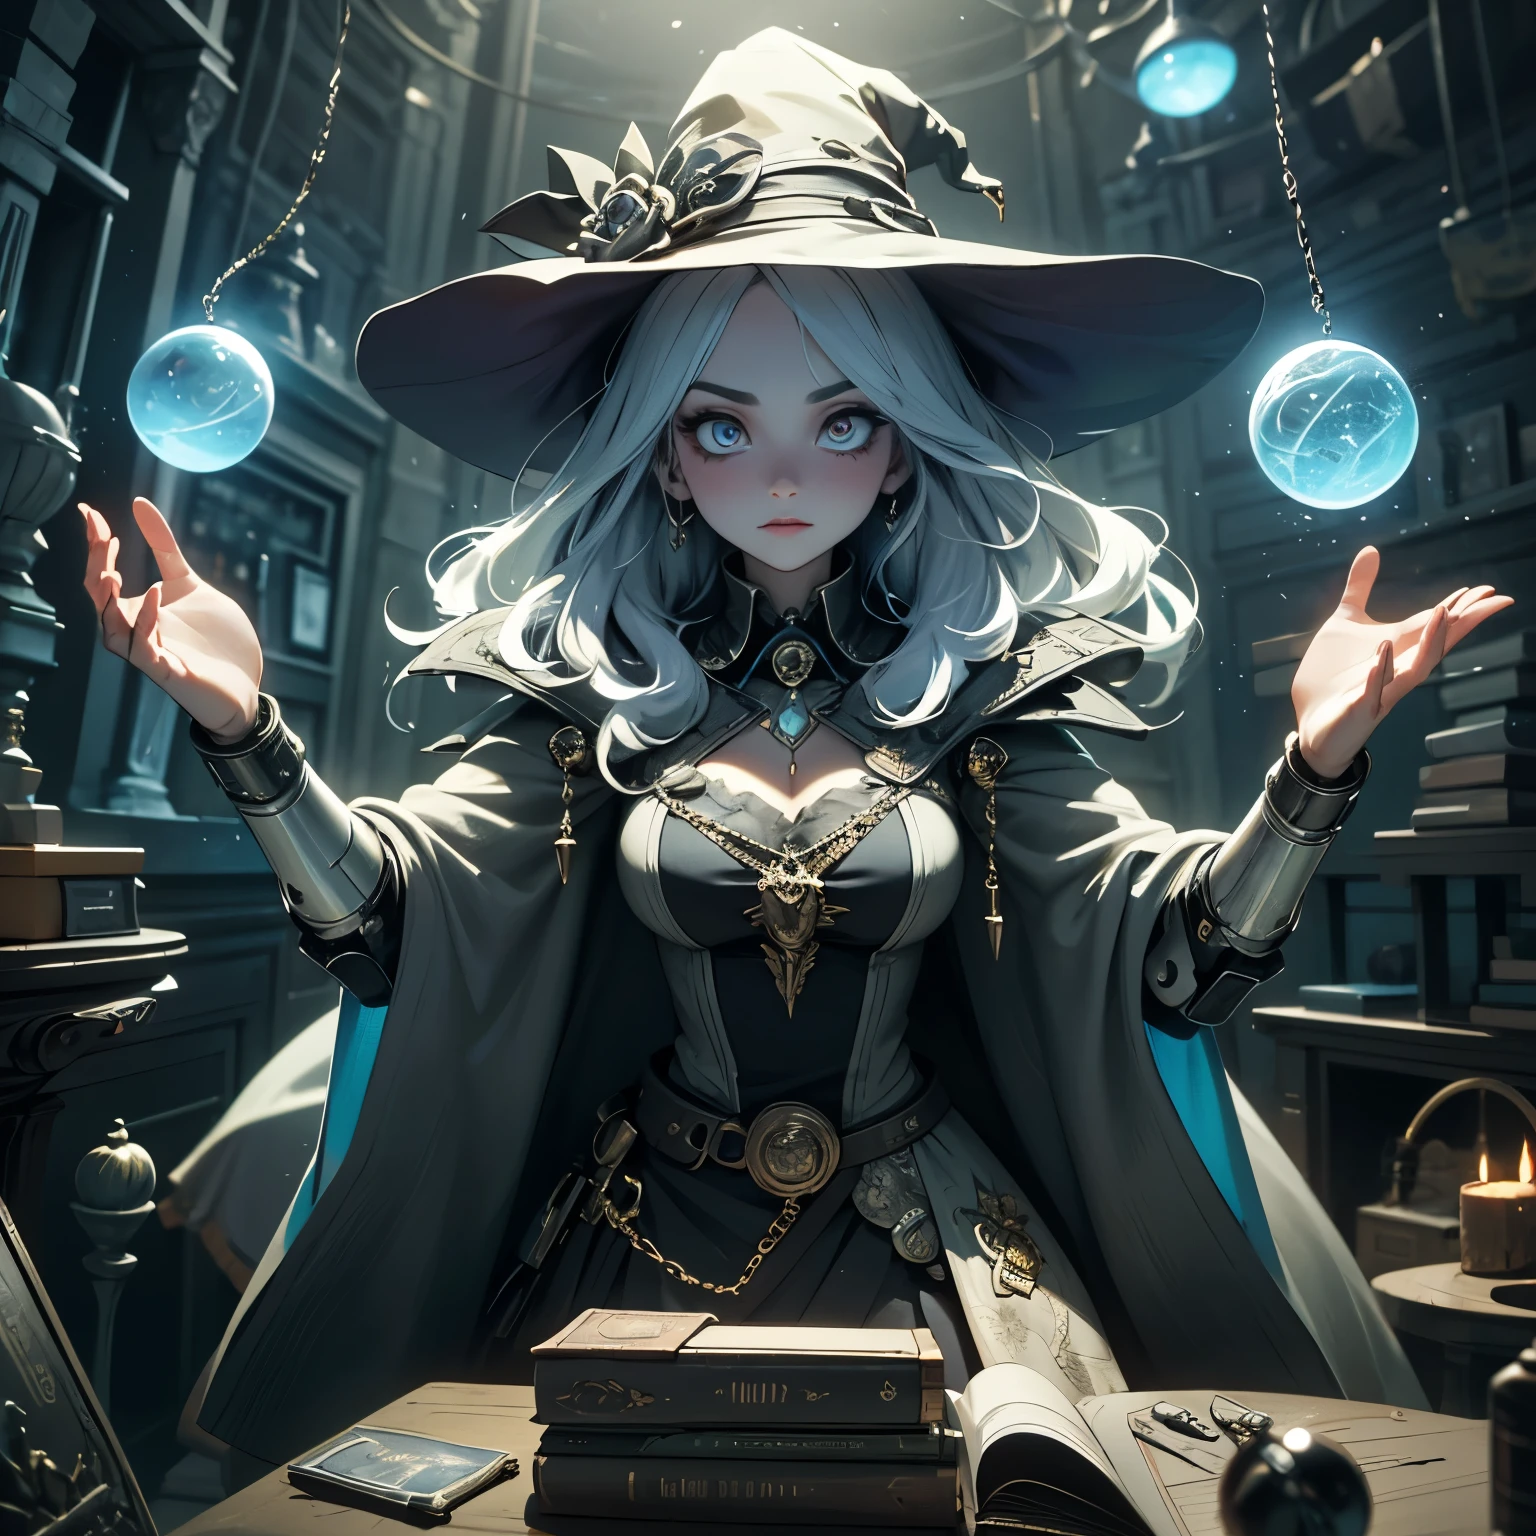 depicts a modern-day witch who has embraced the world of cybernetics to enhance her magical abilities. The artwork should convey the enchanting blend of traditional witchcraft and futuristic technology. Here are some specific elements to include: The Witch's Lair: The setting should be a cozy yet slightly eerie room, filled with magical books, crystal balls, potion ingredients, and antique furnishings. The room should be dimly lit by candles and a soft, mystical glow emanating from her cybernetic enhancements. The Cyborg Witch: The central focus of the artwork is the witch herself. She's a striking figure with a mix of traditional witch attire and cybernetic enhancements. Her clothing should have a witchy, occult aesthetic, with flowing robes, a pointed hat, and an intricate pentagram necklace. Her arms, however, have been upgraded with cybernetic components that incorporate magical symbols and glowing runes. Magical Interface: The witch is in the midst of casting a spell, with a holographic, touch-screen interface floating before her. This interface includes spell incantations, arcane symbols, and digital components, demonstrating her fusion of magic and technology. Spell Ingredients: On a nearby table, there should be a collection of spell ingredients, like herbs, potions, and magical artifacts. Some of these items may have been modified with cybernetic enhancements, blurring the line between the natural and the technological. Familiar: The witch's familiar, perhaps a cat or raven, should be present in the scene, serving as her magical companion. The familiar could also have subtle cybernetic enhancements or glowing eyes. Glowing Runes: The room should be adorned with ancient symbols and glowing runes on the walls and floor, contributing to the magical atmosphere. Aetherial Lighting: Use a combination of mystical, ethereal lighting and cybernetic glows to create a captivating interplay of light and shadow. The contrast between the tradit